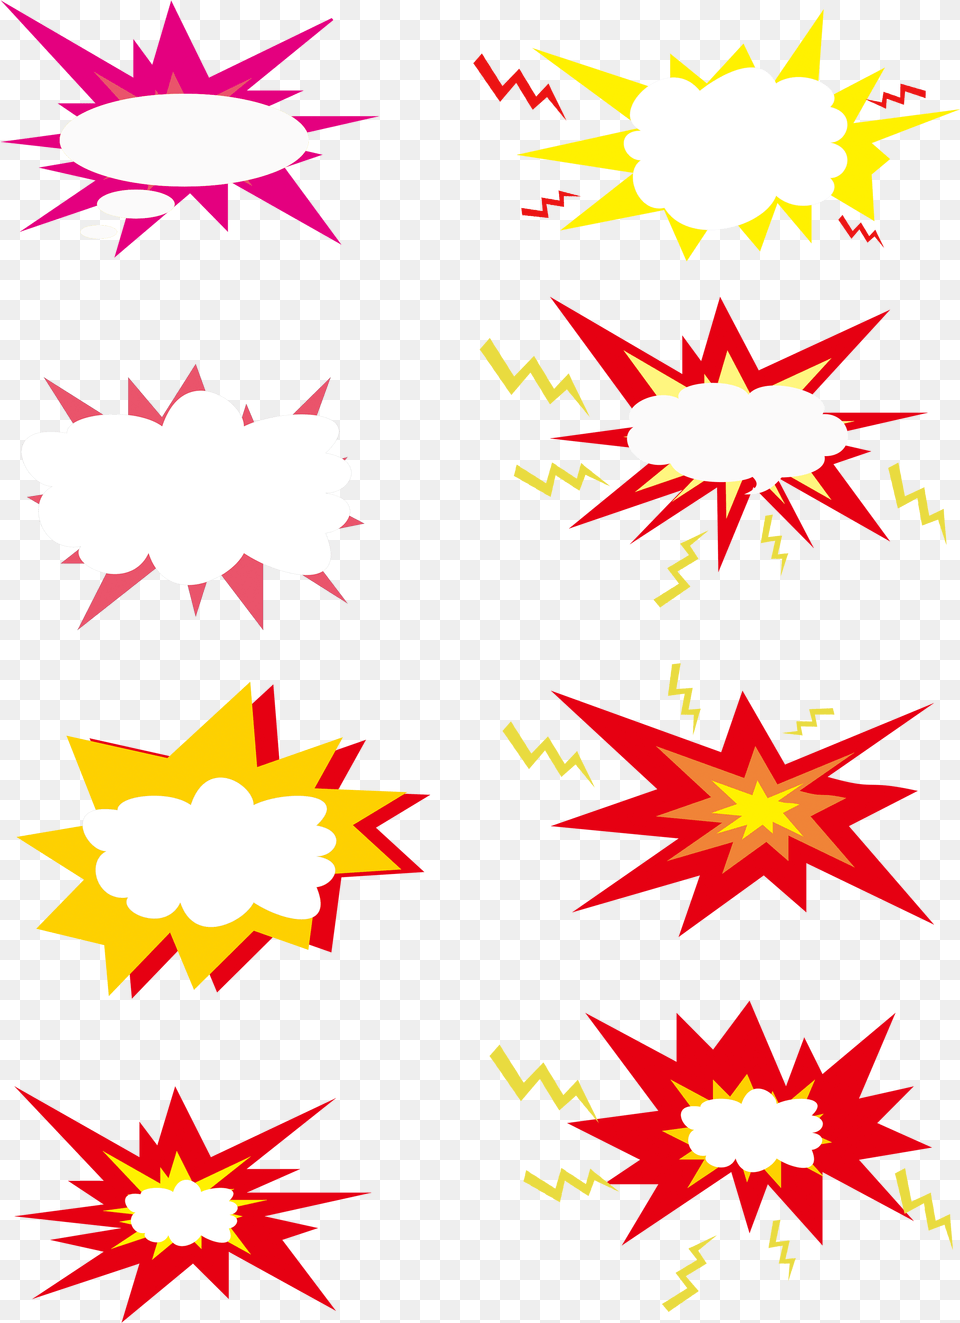 Explosion Clouds Simple Red And Vector Flare, Light, Lighting, Flag Png Image